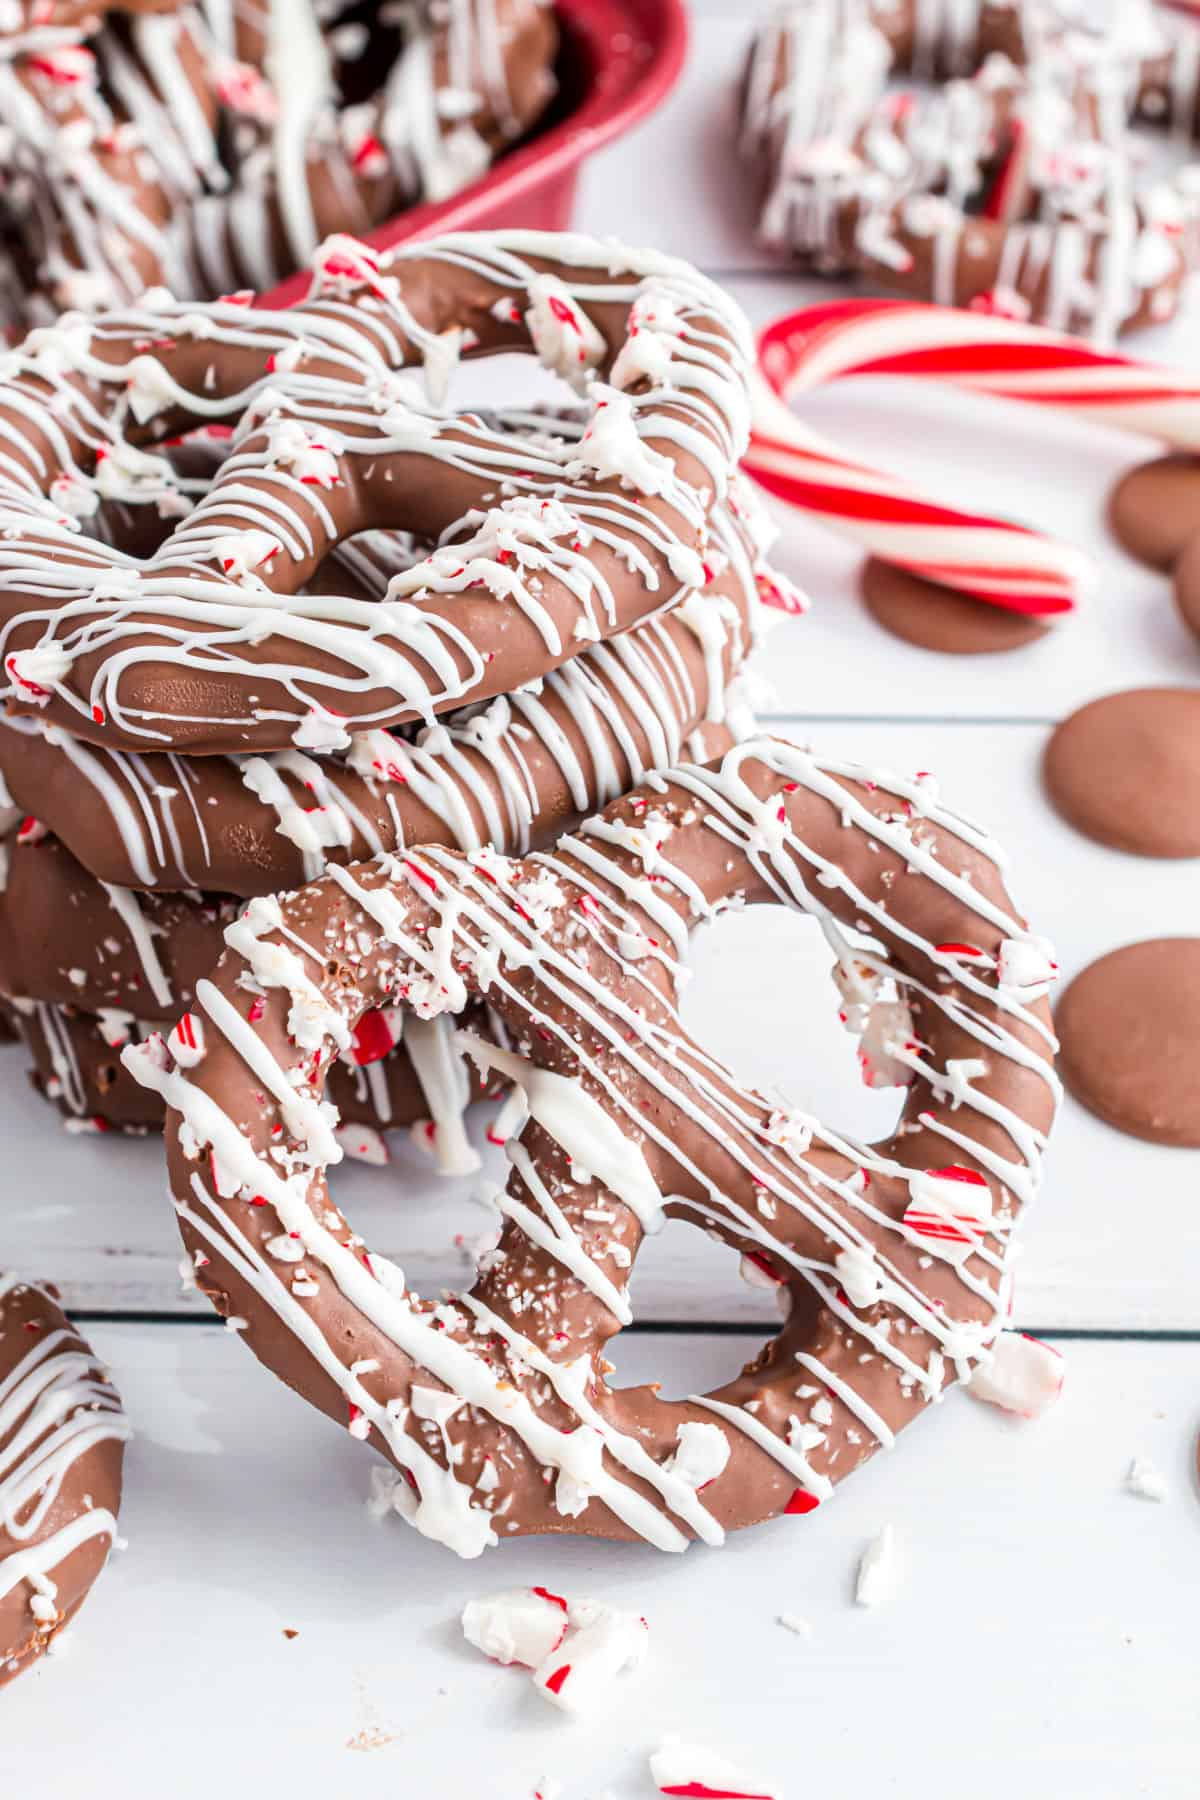 Chocolate covered pretzels drizzled with white chocolate and crushed candy canes.